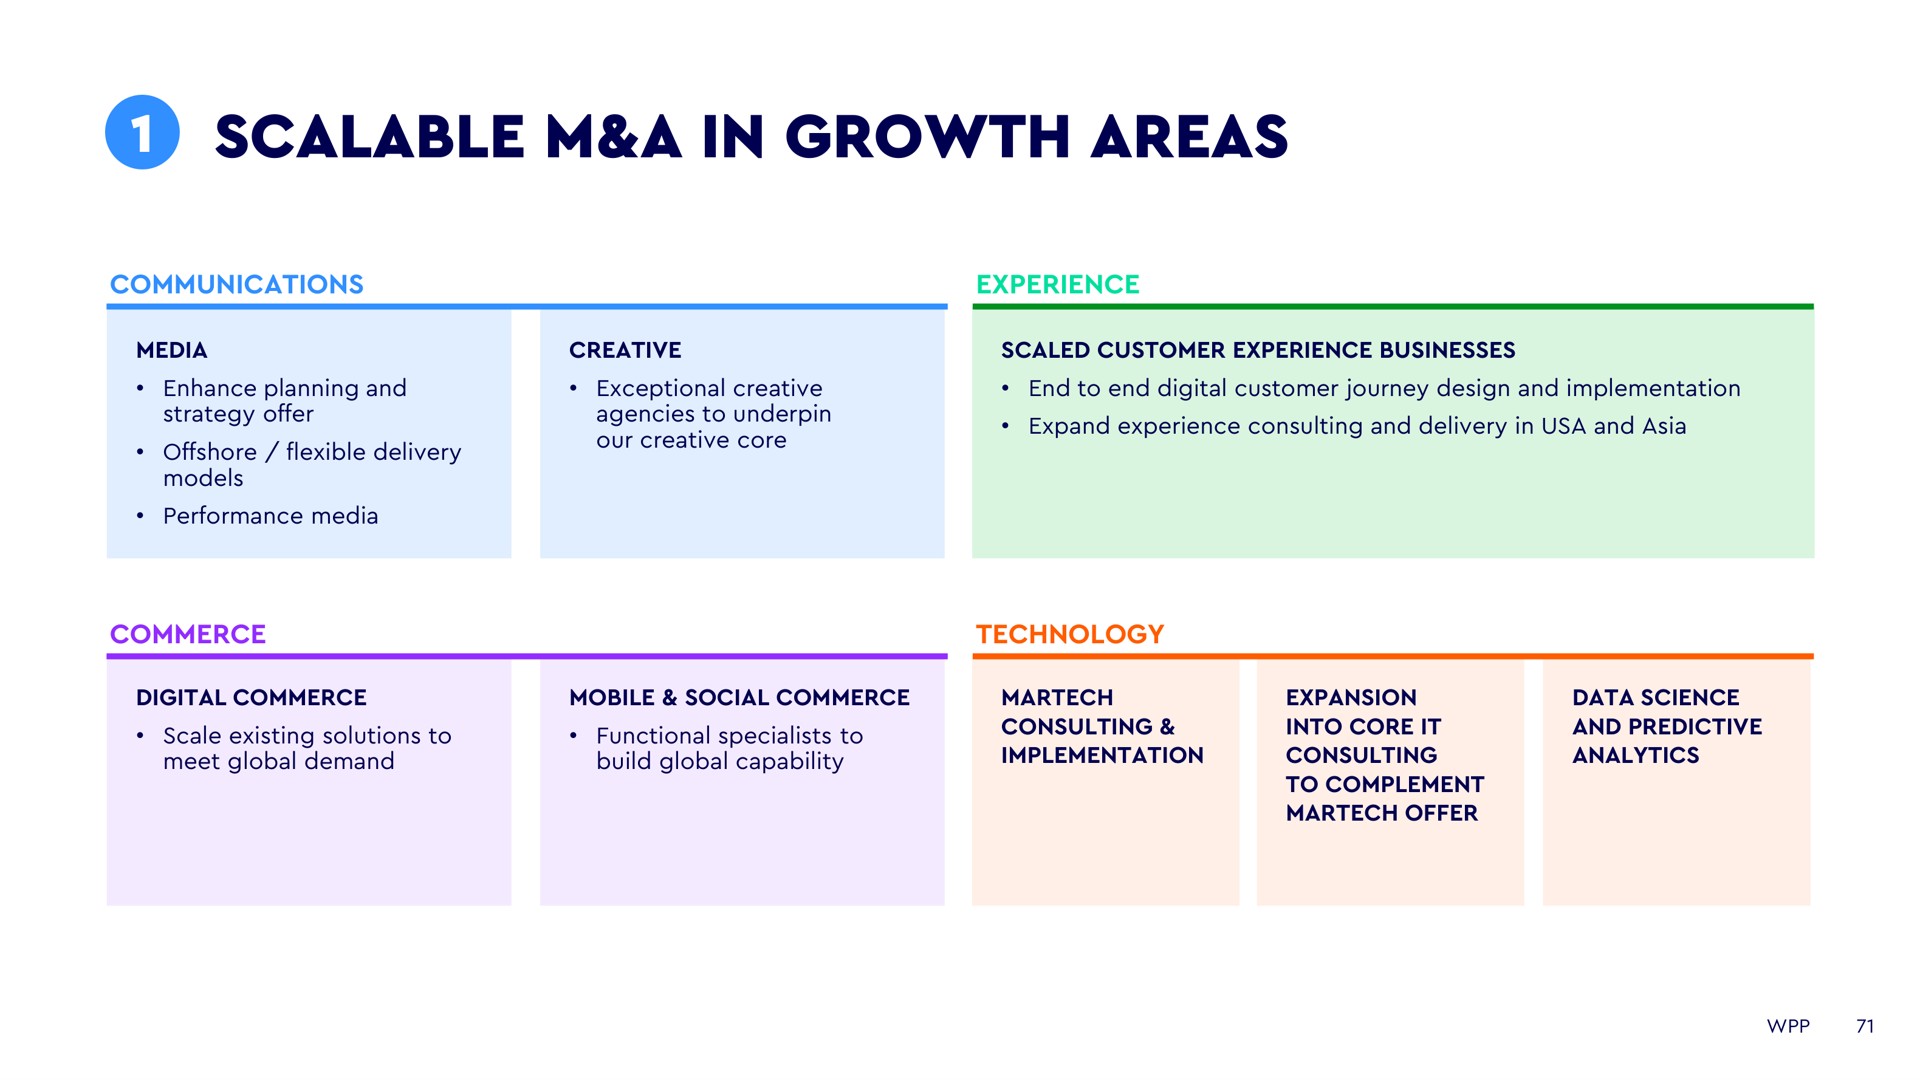 scalable a in growth areas | WPP